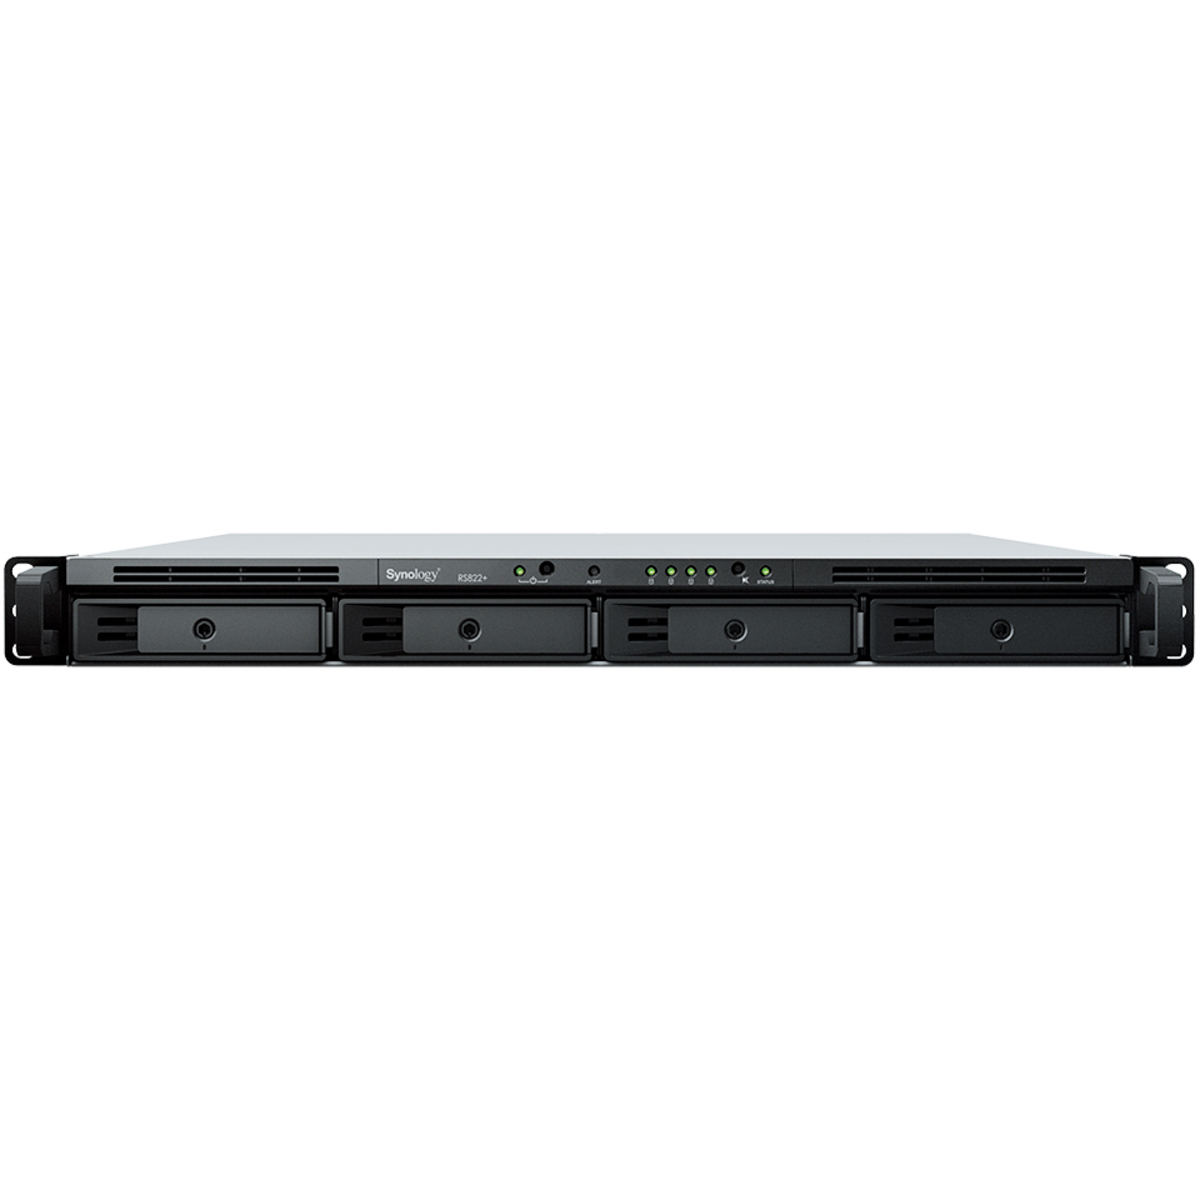 Synology RackStation RS822+ 56tb 4-Bay RackMount Multimedia / Power User / Business NAS - Network Attached Storage Device 4x14tb Western Digital Red Pro WD142KFGX 3.5 7200rpm SATA 6Gb/s HDD NAS Class Drives Installed - Burn-In Tested RackStation RS822+